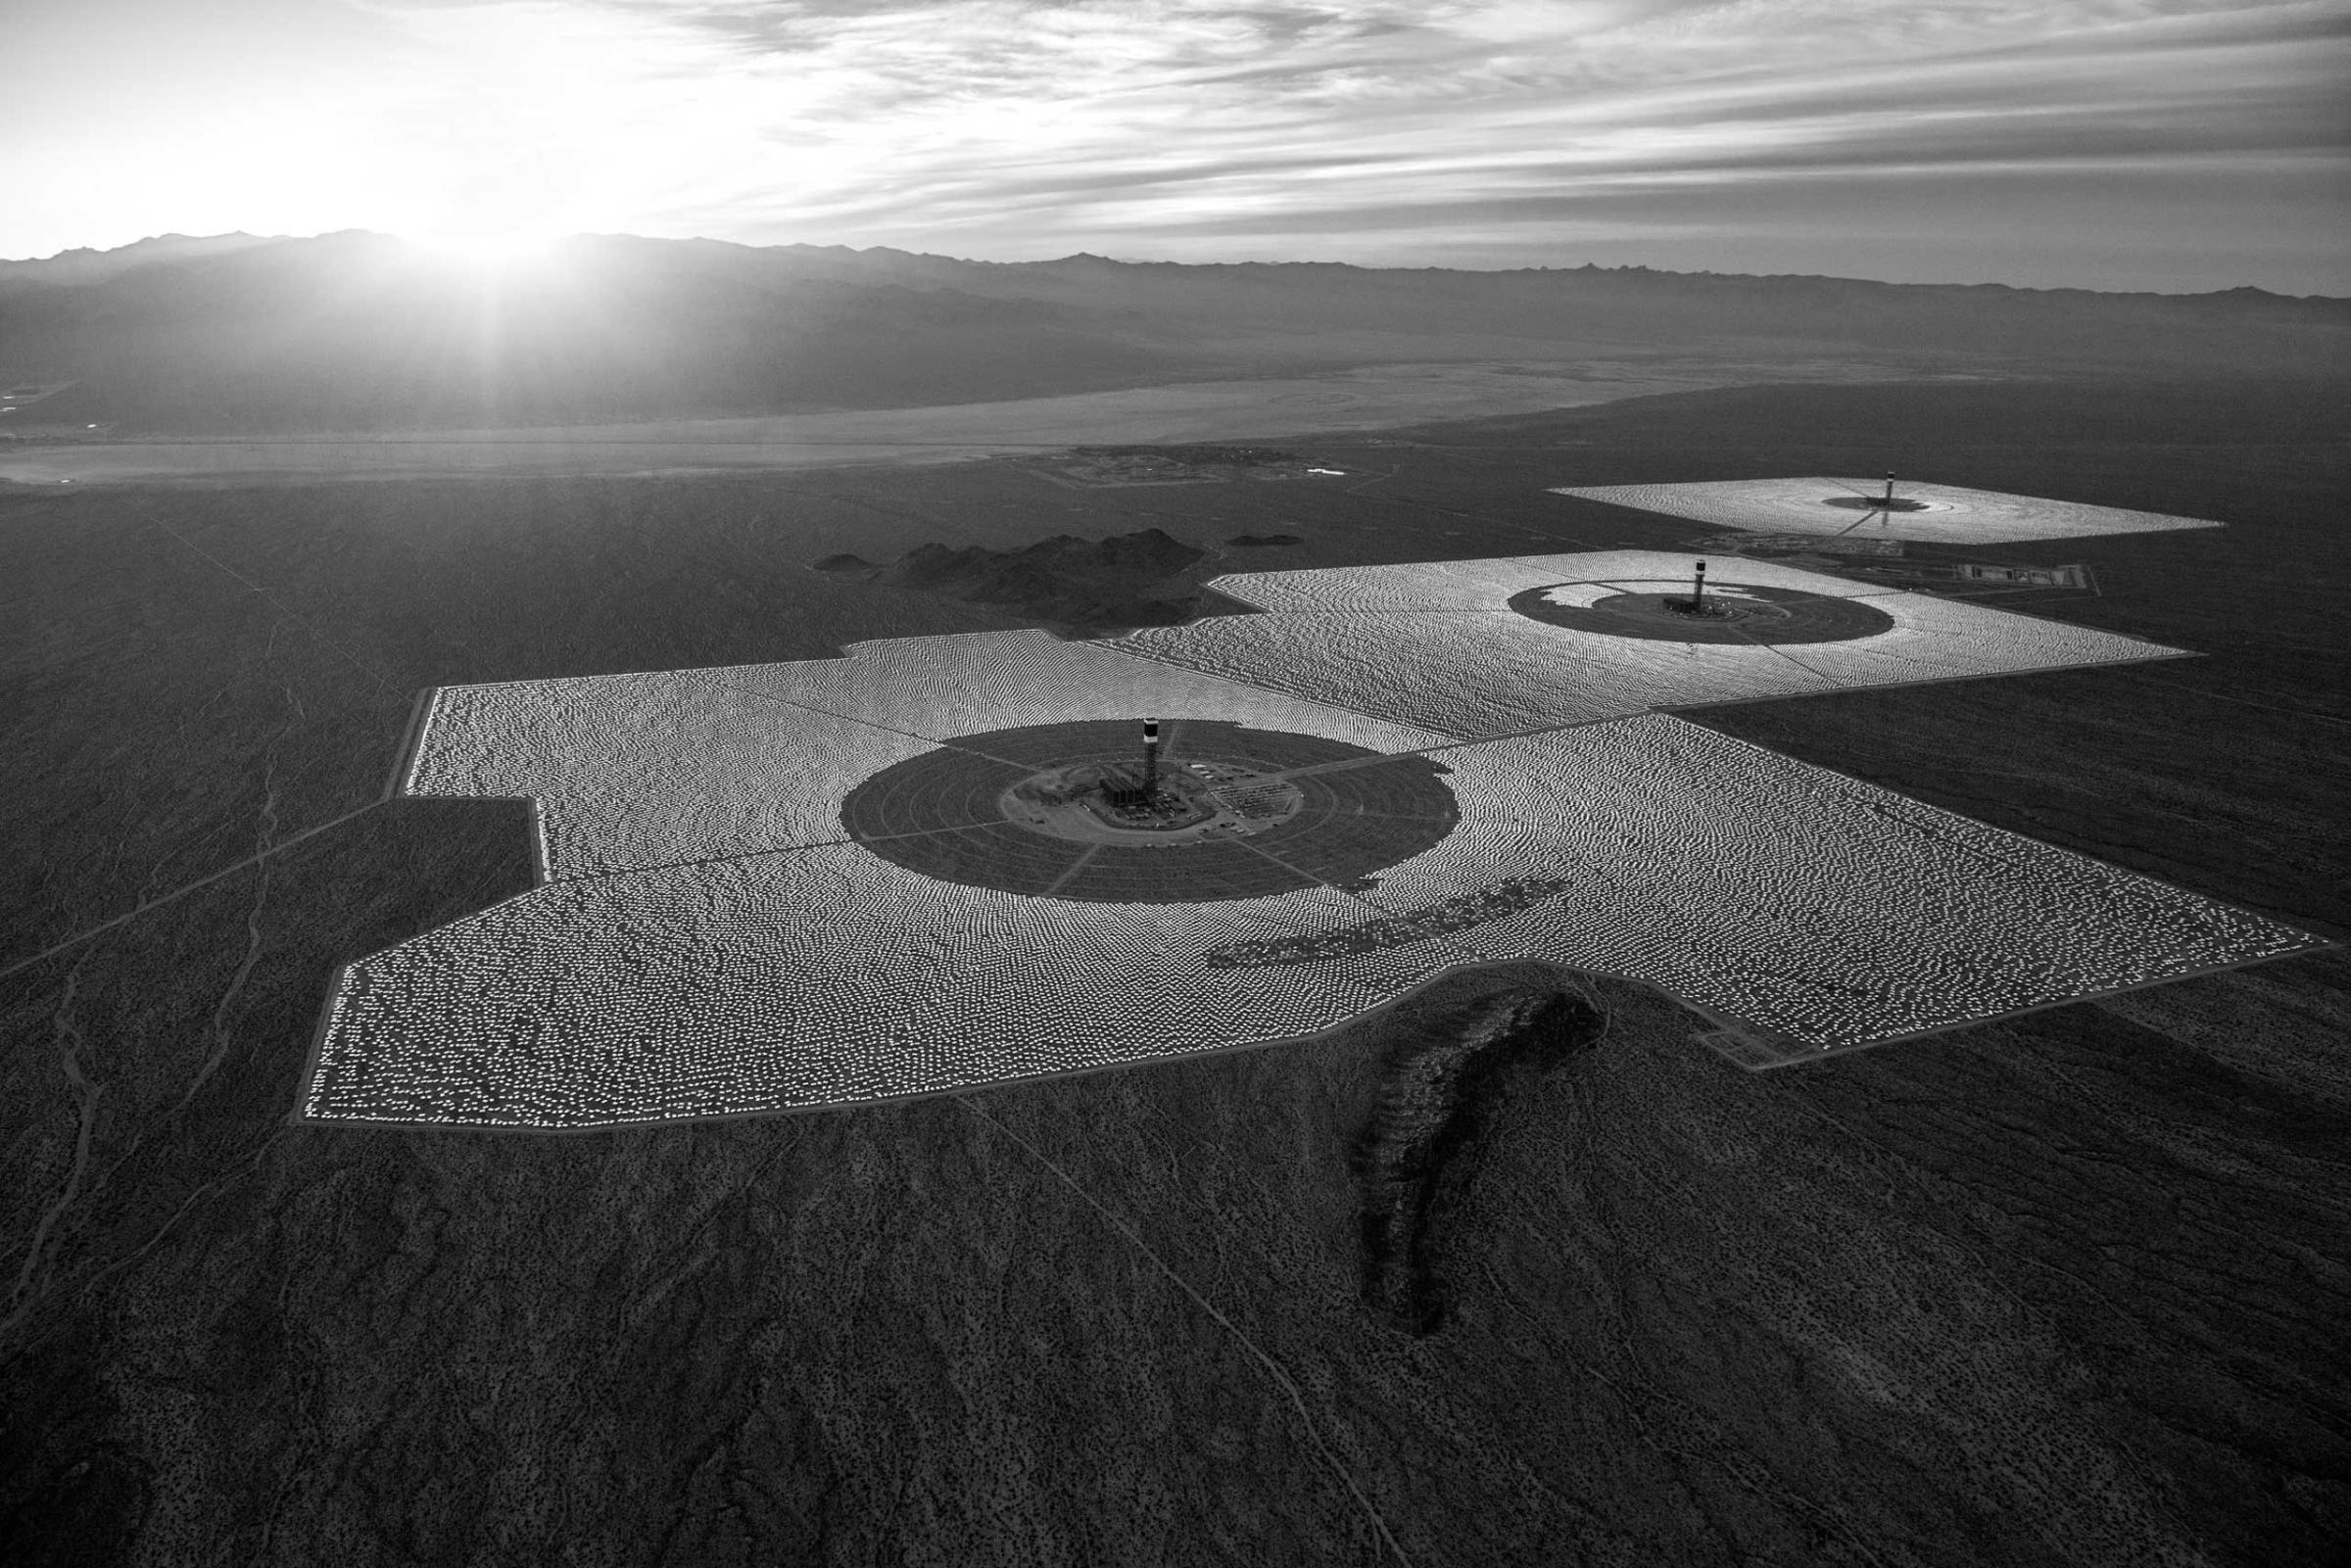 in the  Mojave Desert, California. Unlike solar photovoltaic plants, which generate electricity directly from sunlight, Ivanpah uses hundreds of thousands of curved mirrors to reflect and concentrate the desert sunshine. Jamey Stillings